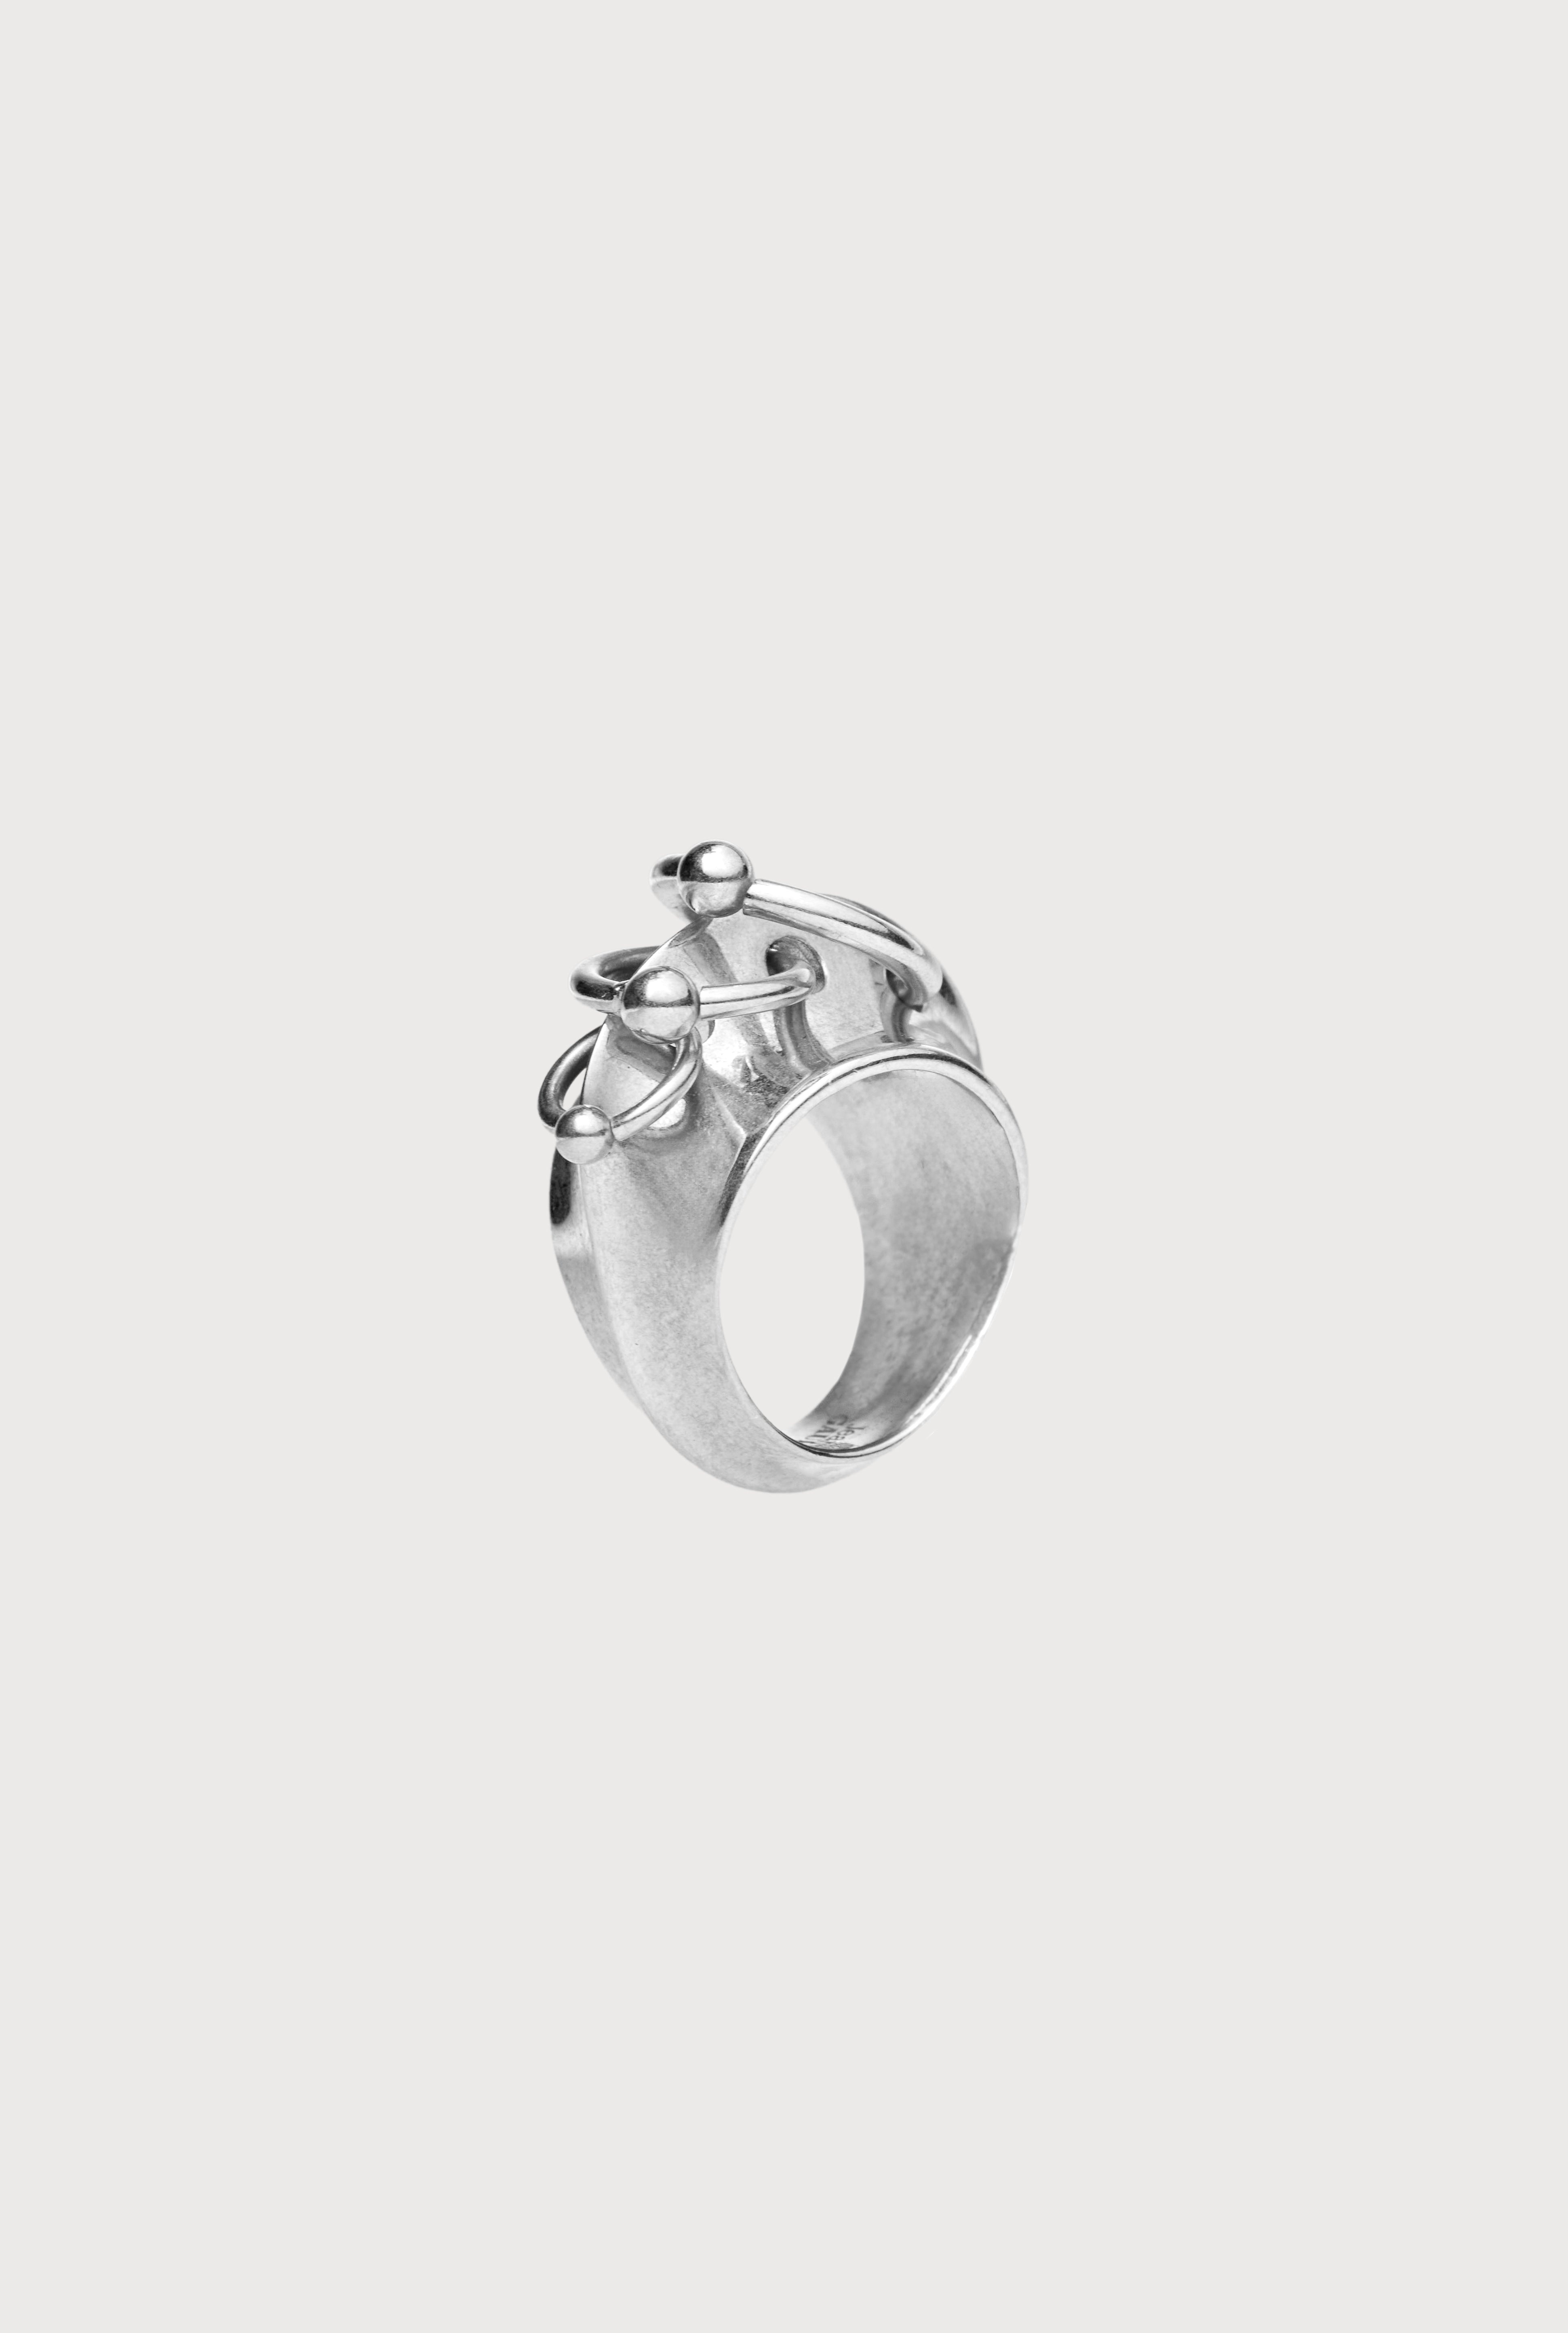 THE SILVER-TONE PIERCING RING - 1